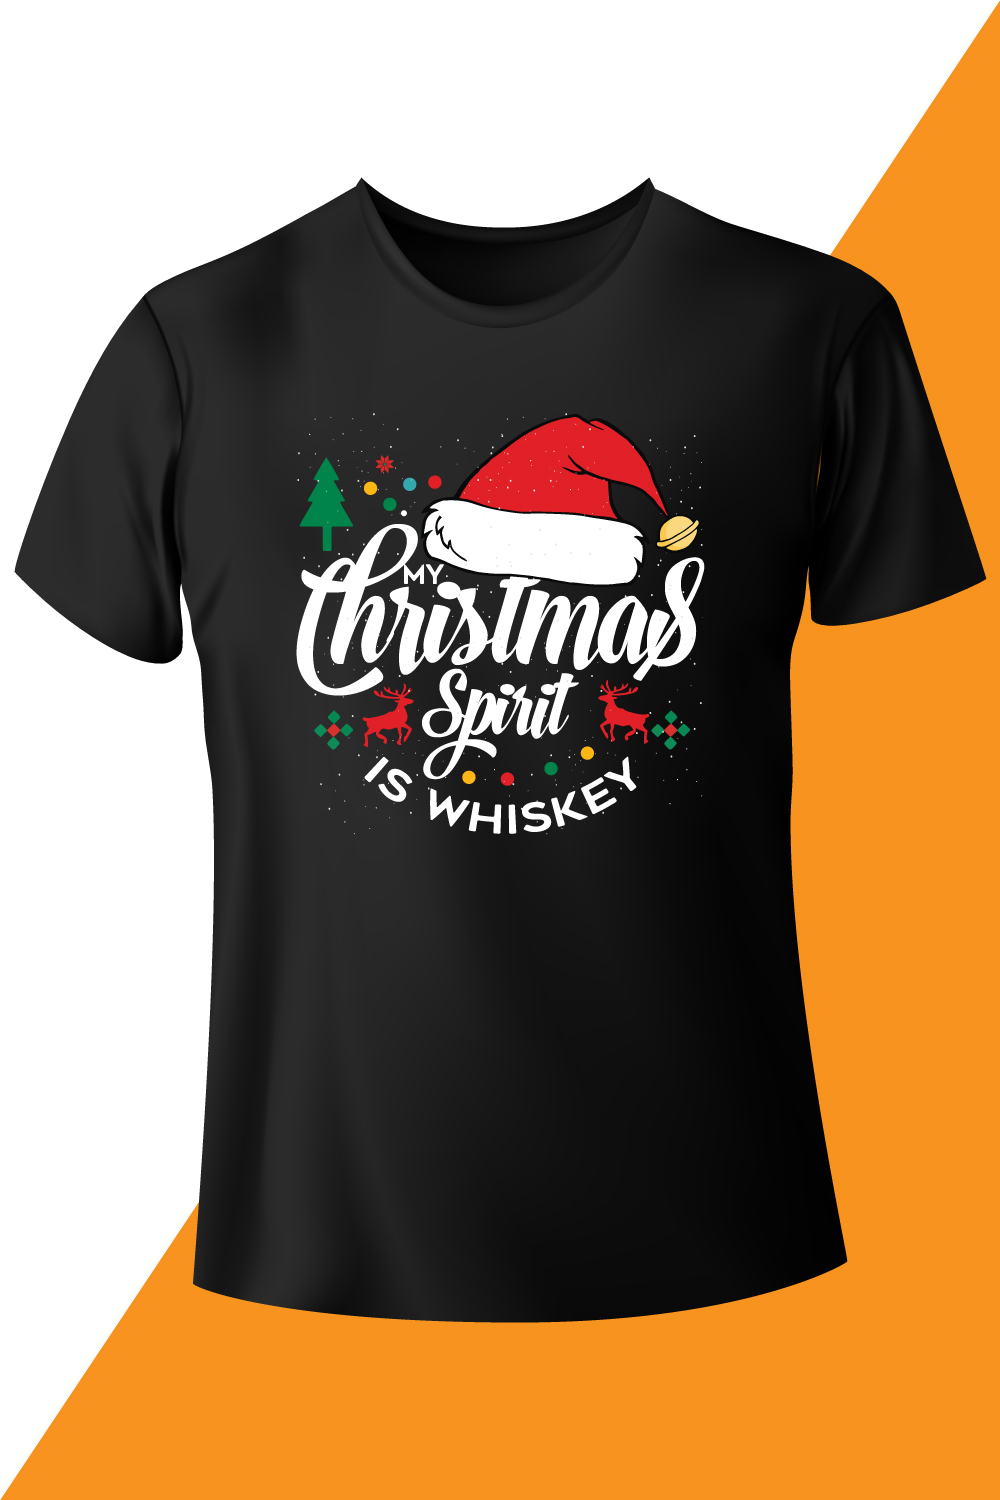 Image of a black t-shirt with an amazing inscription my christmas spirit is whiskey.